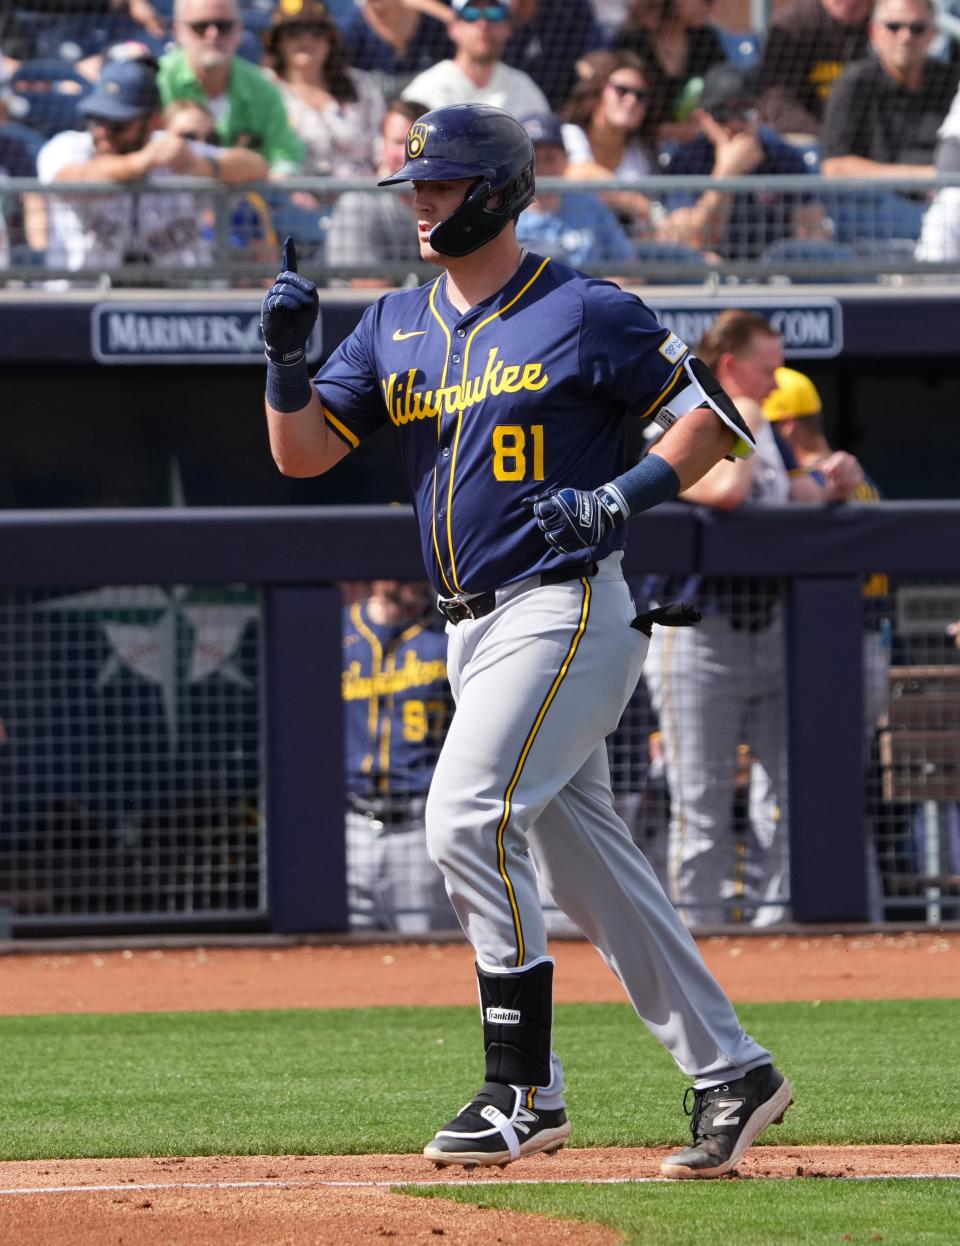 Wes Clarke has caught the attention of the Brewers with his ability to slug the baseball.